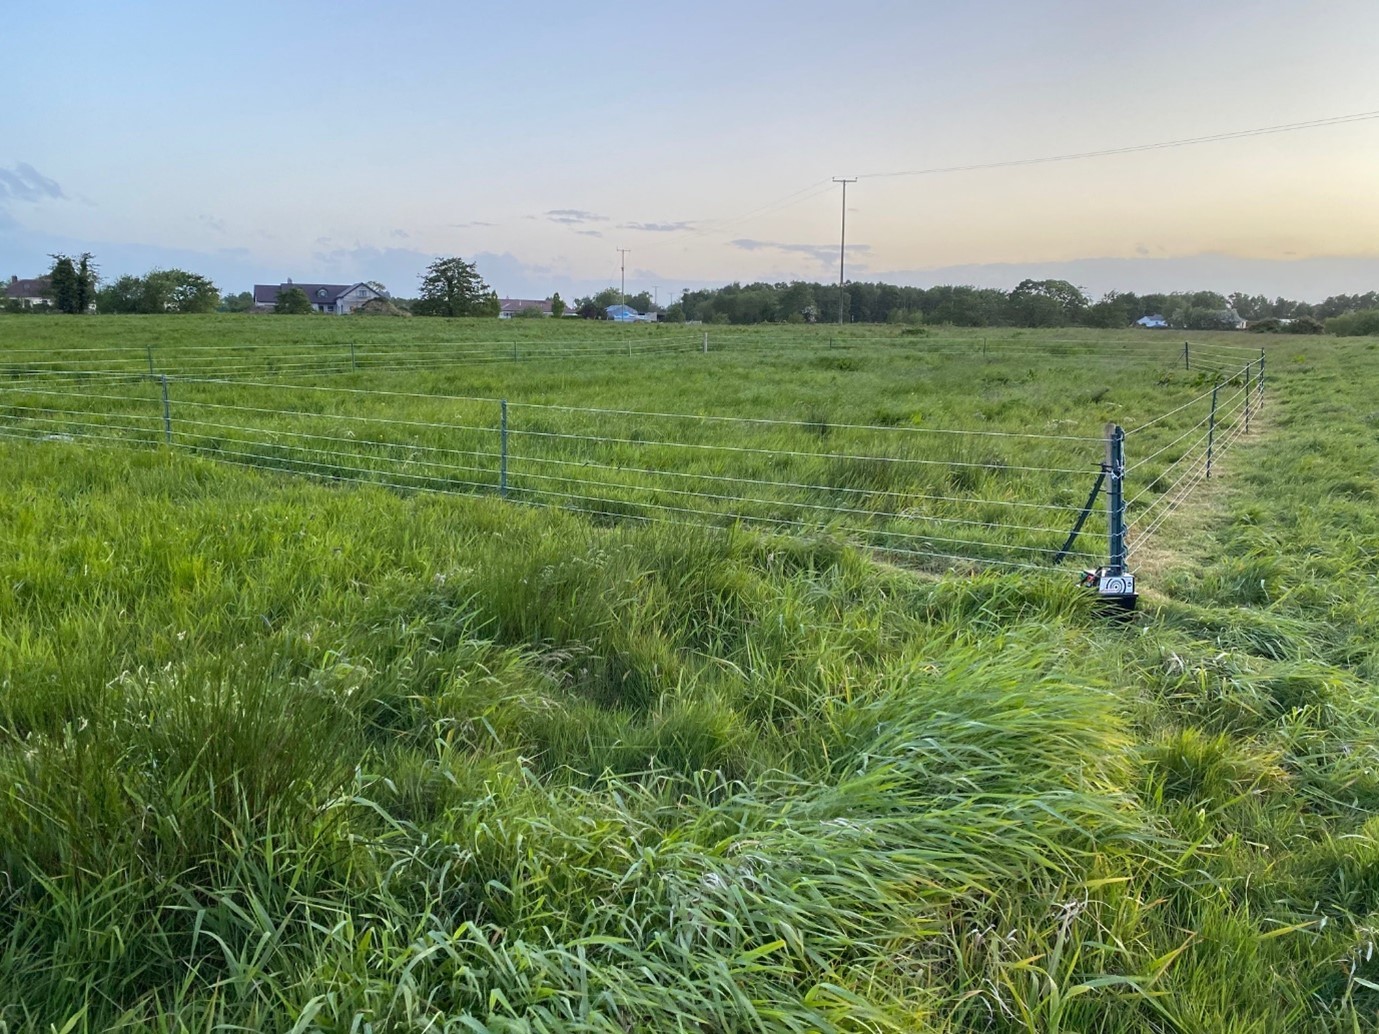 Temporary electrified nest protection fence surrounding a Eurasian Curlew nest in hay meadow, L Neagh – photo copyright Kendrew Colhoun